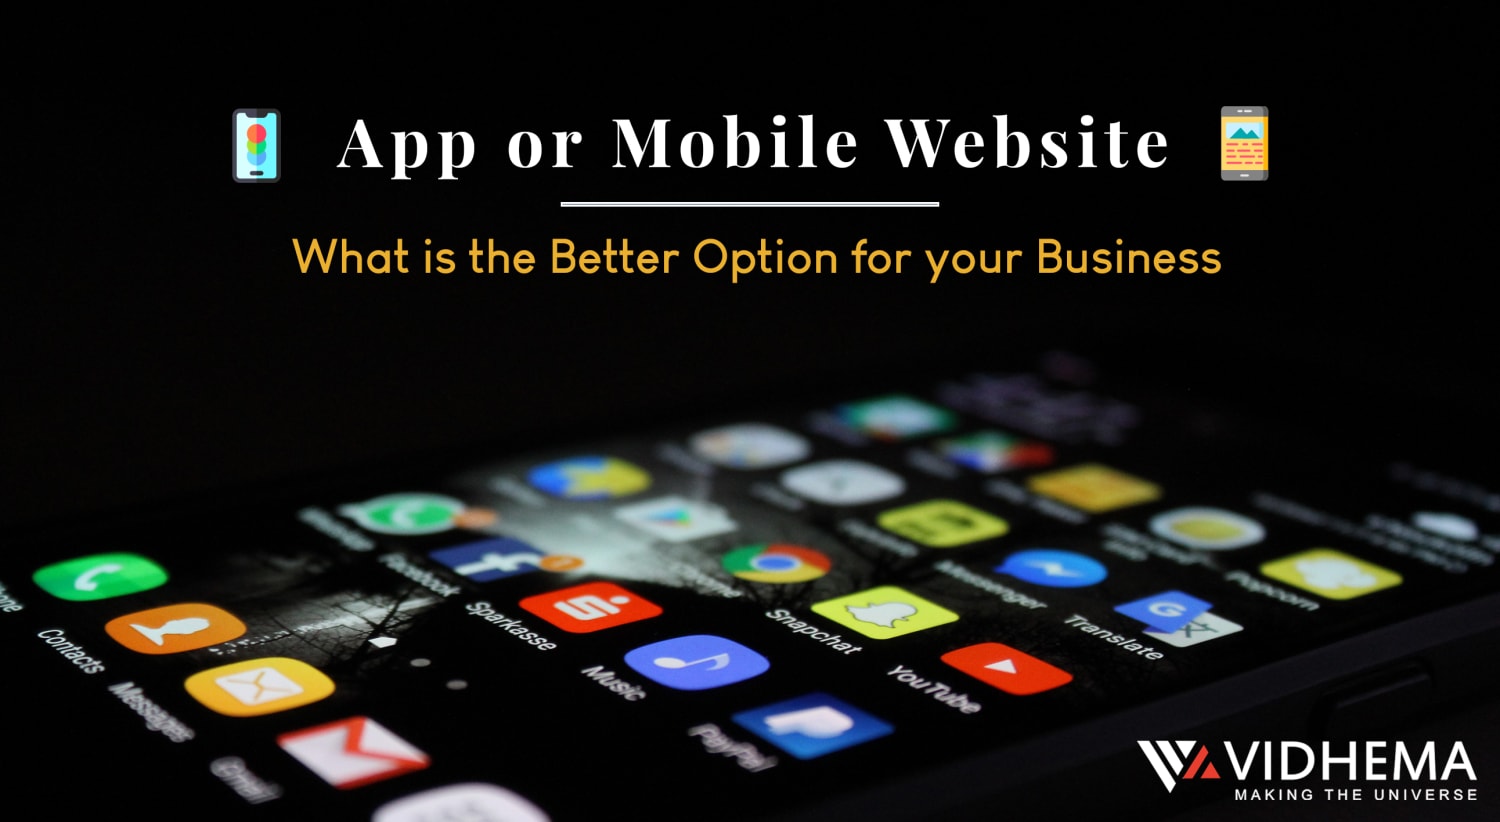 App or Mobile Website - What is the Better Option for your Business